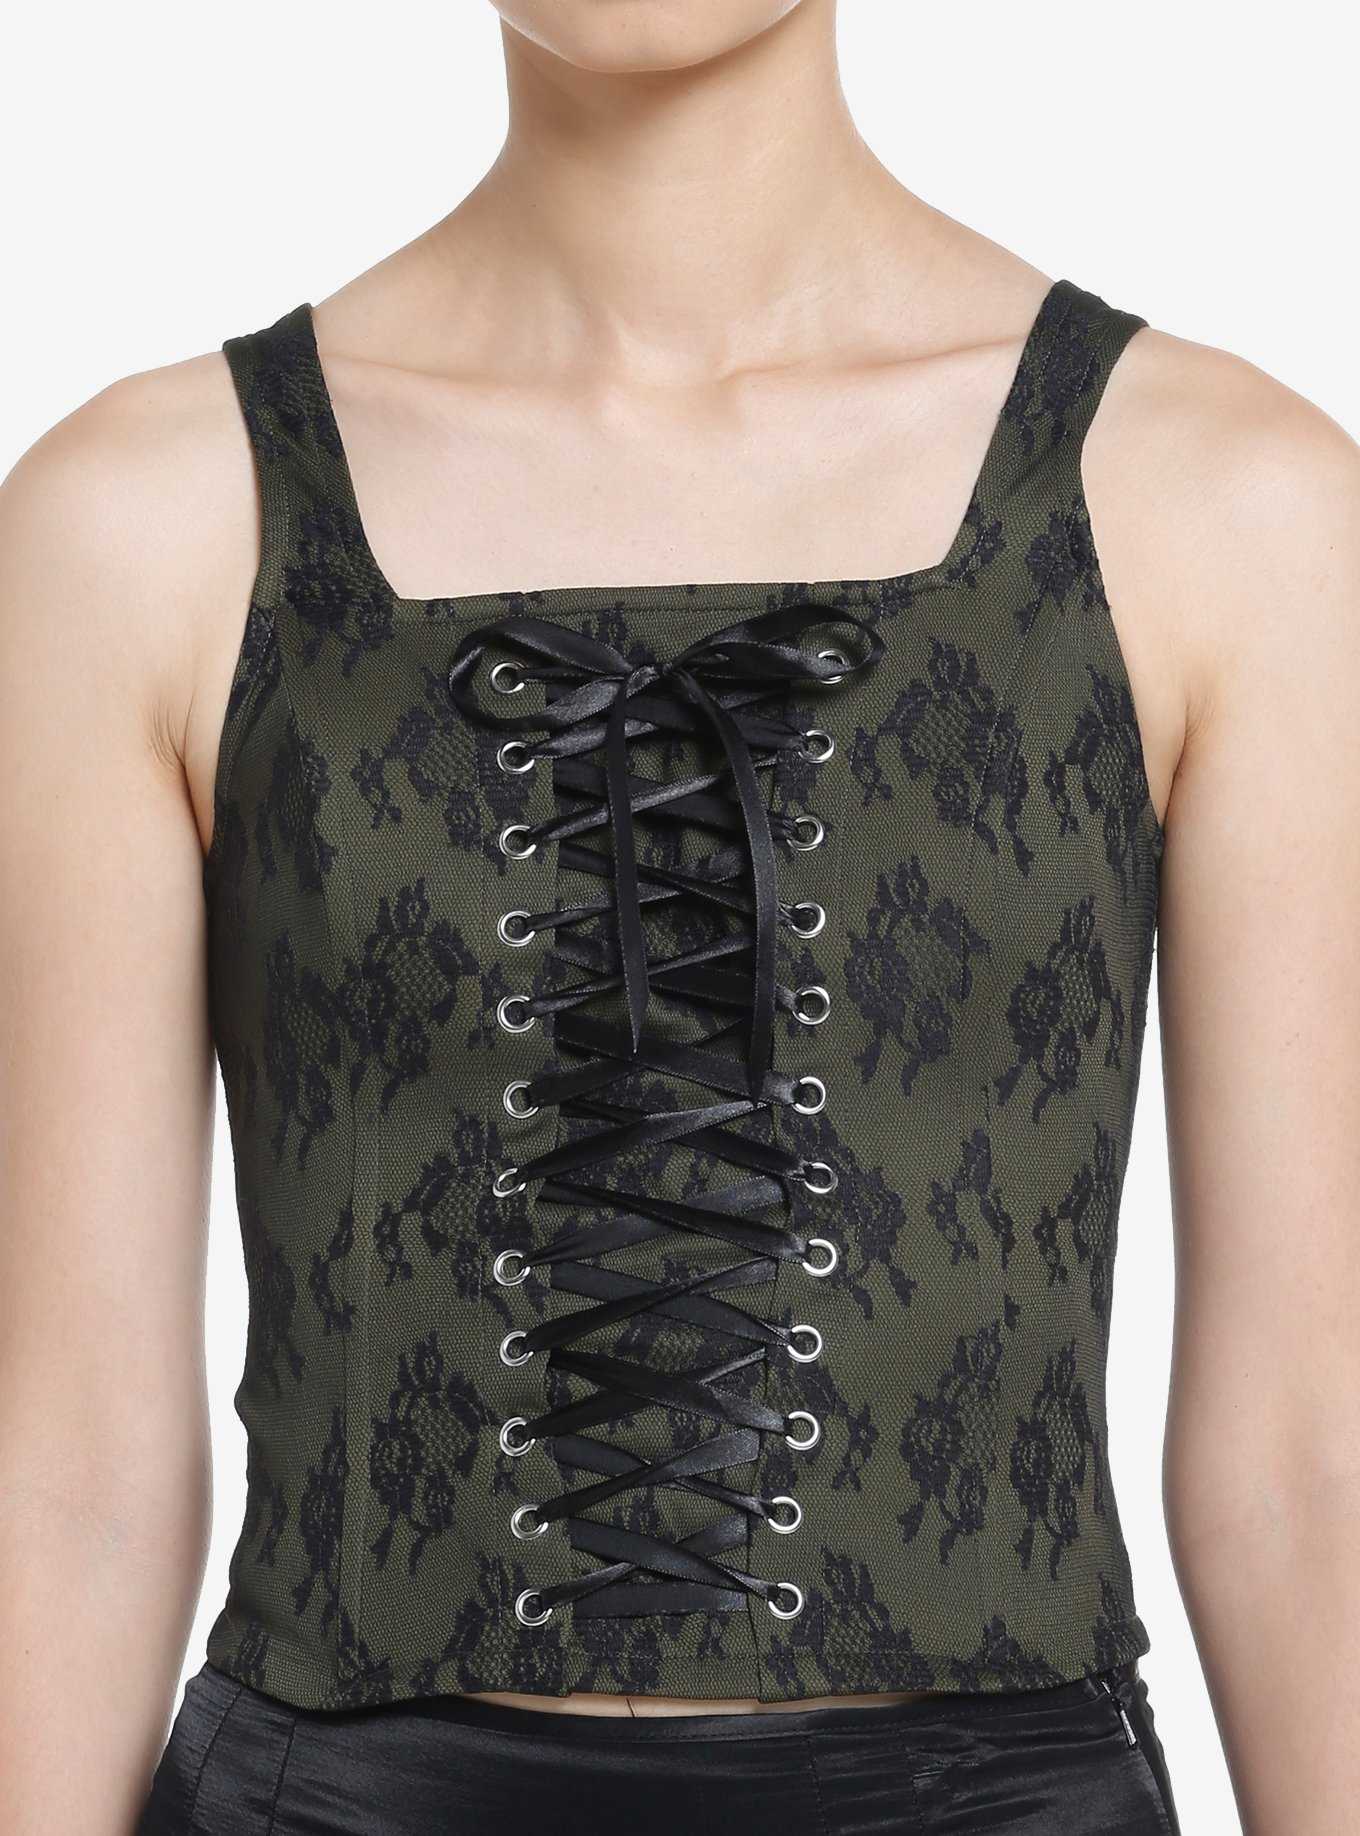 Apperloth A Hook And Eye Lace Up Backless Halter Corset Top